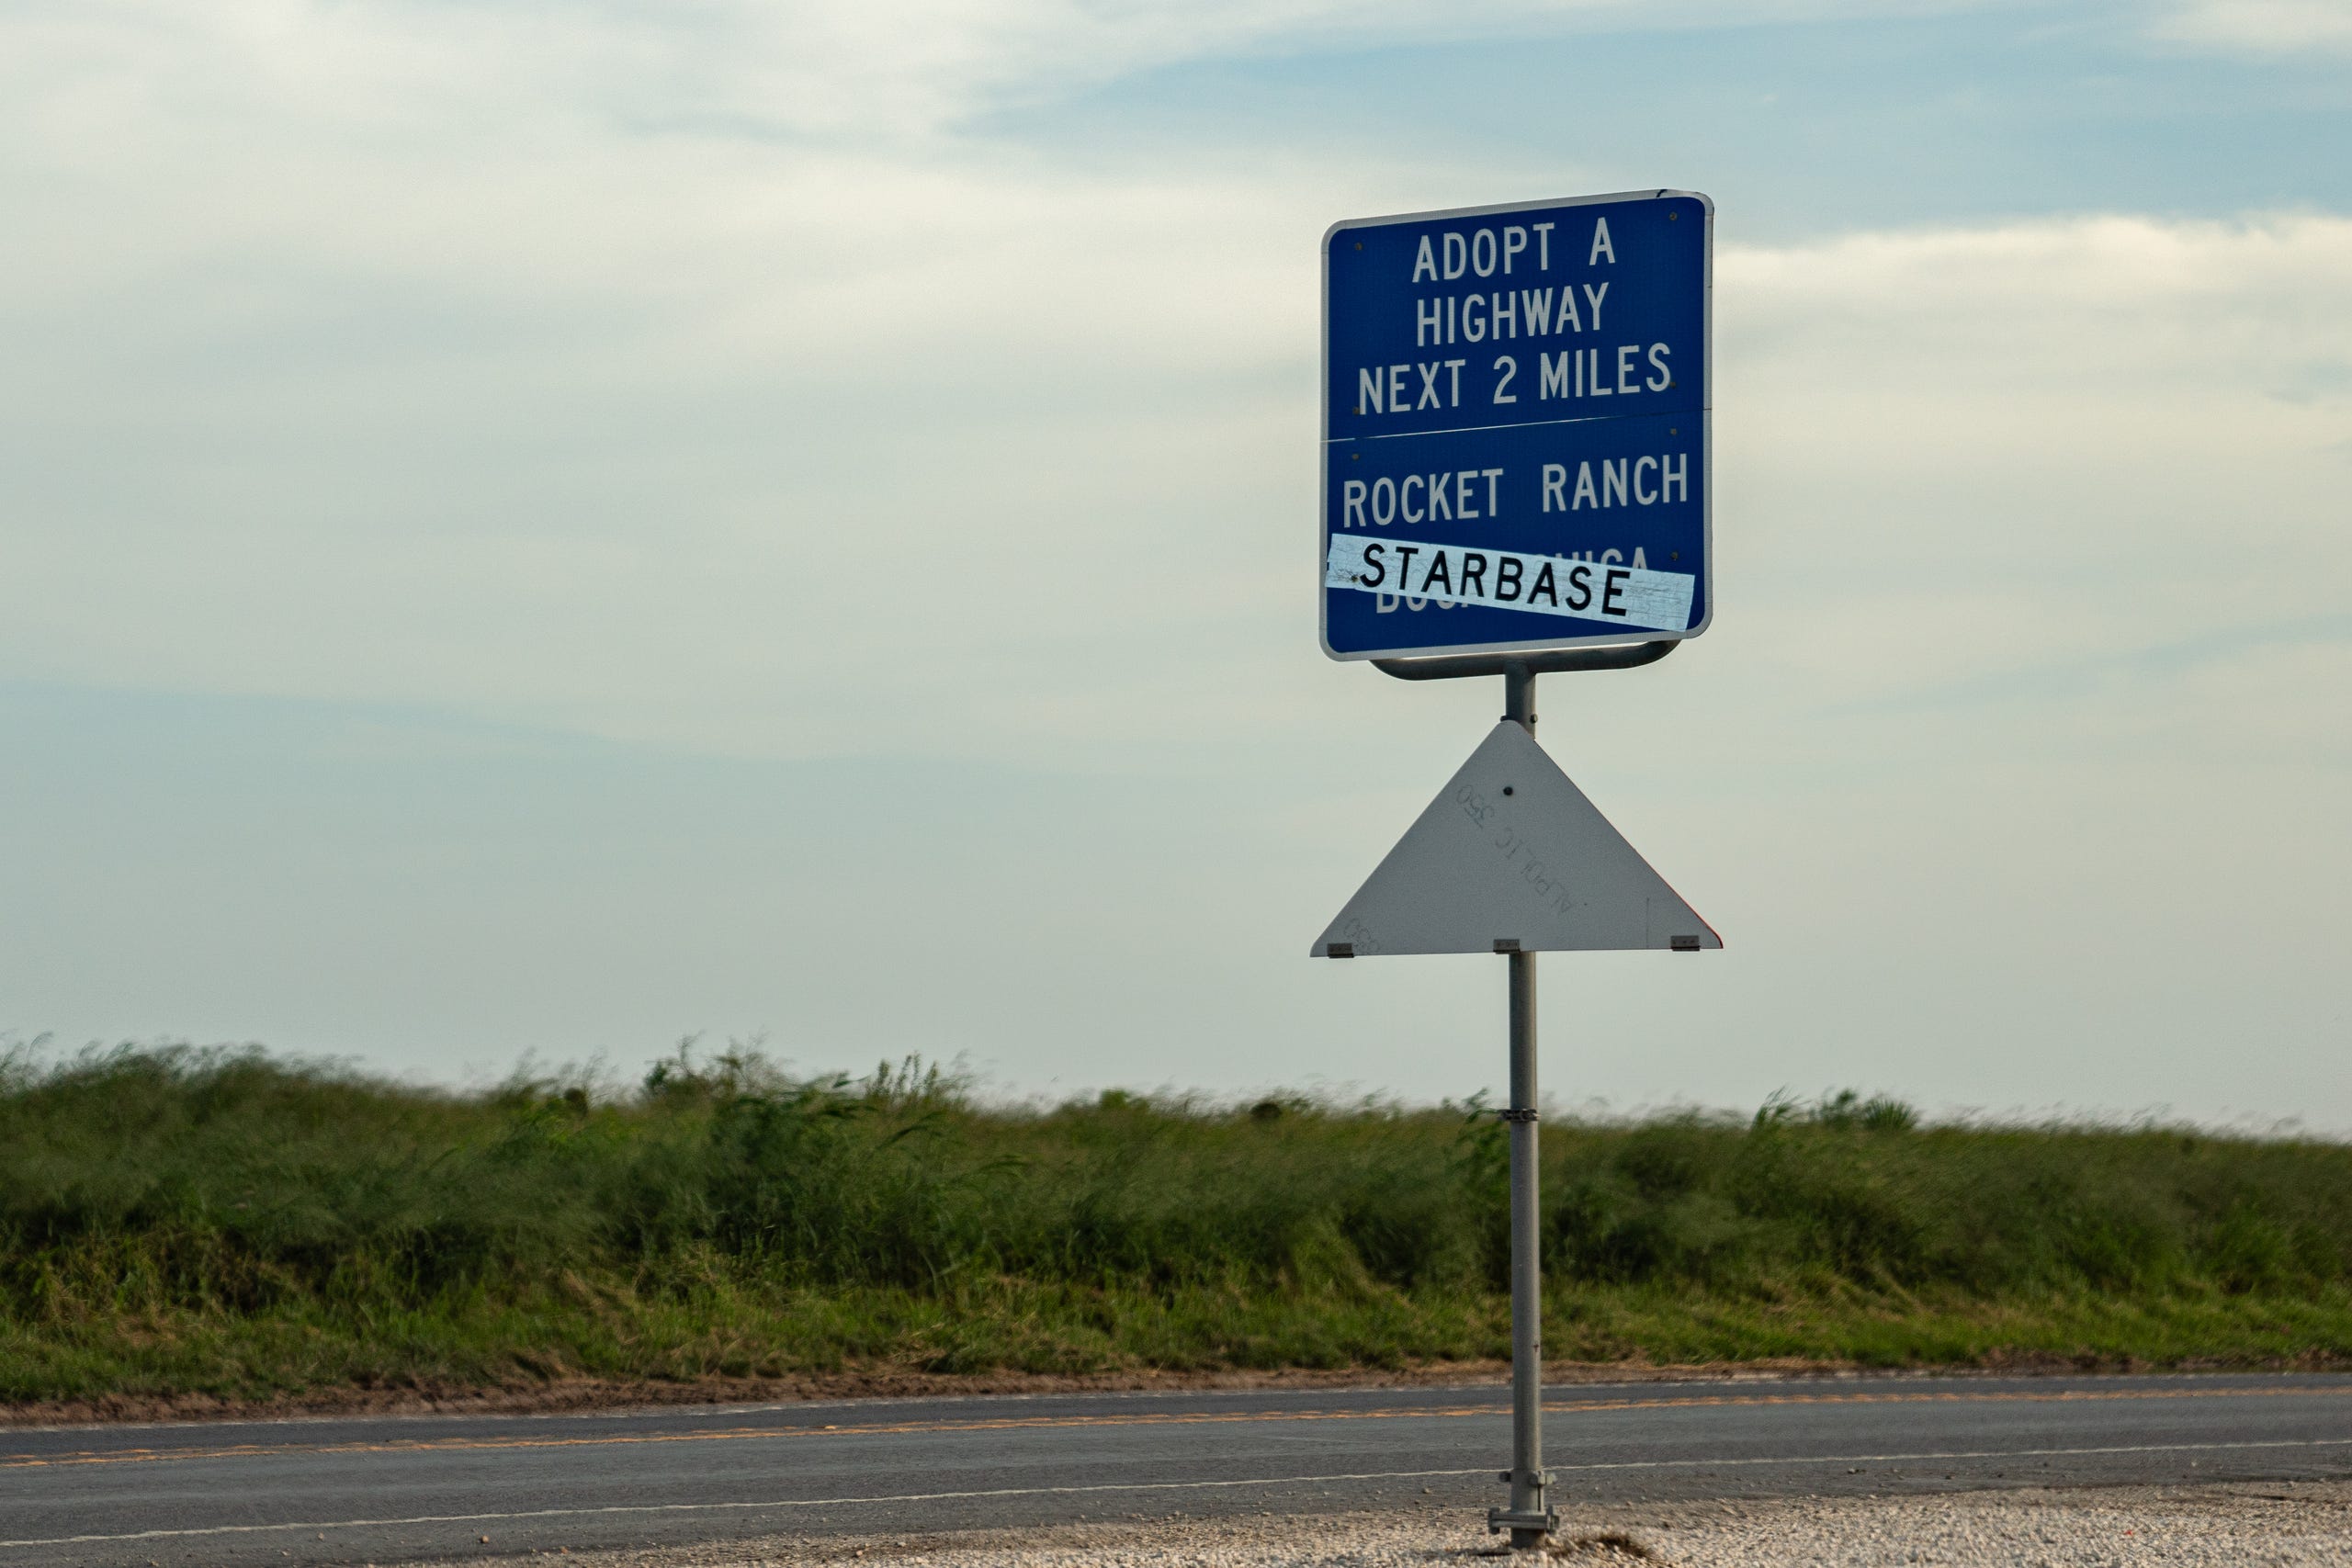 A road sign shows Boca Chica, another area near Brownsville, crossed out in favor of Starbase.